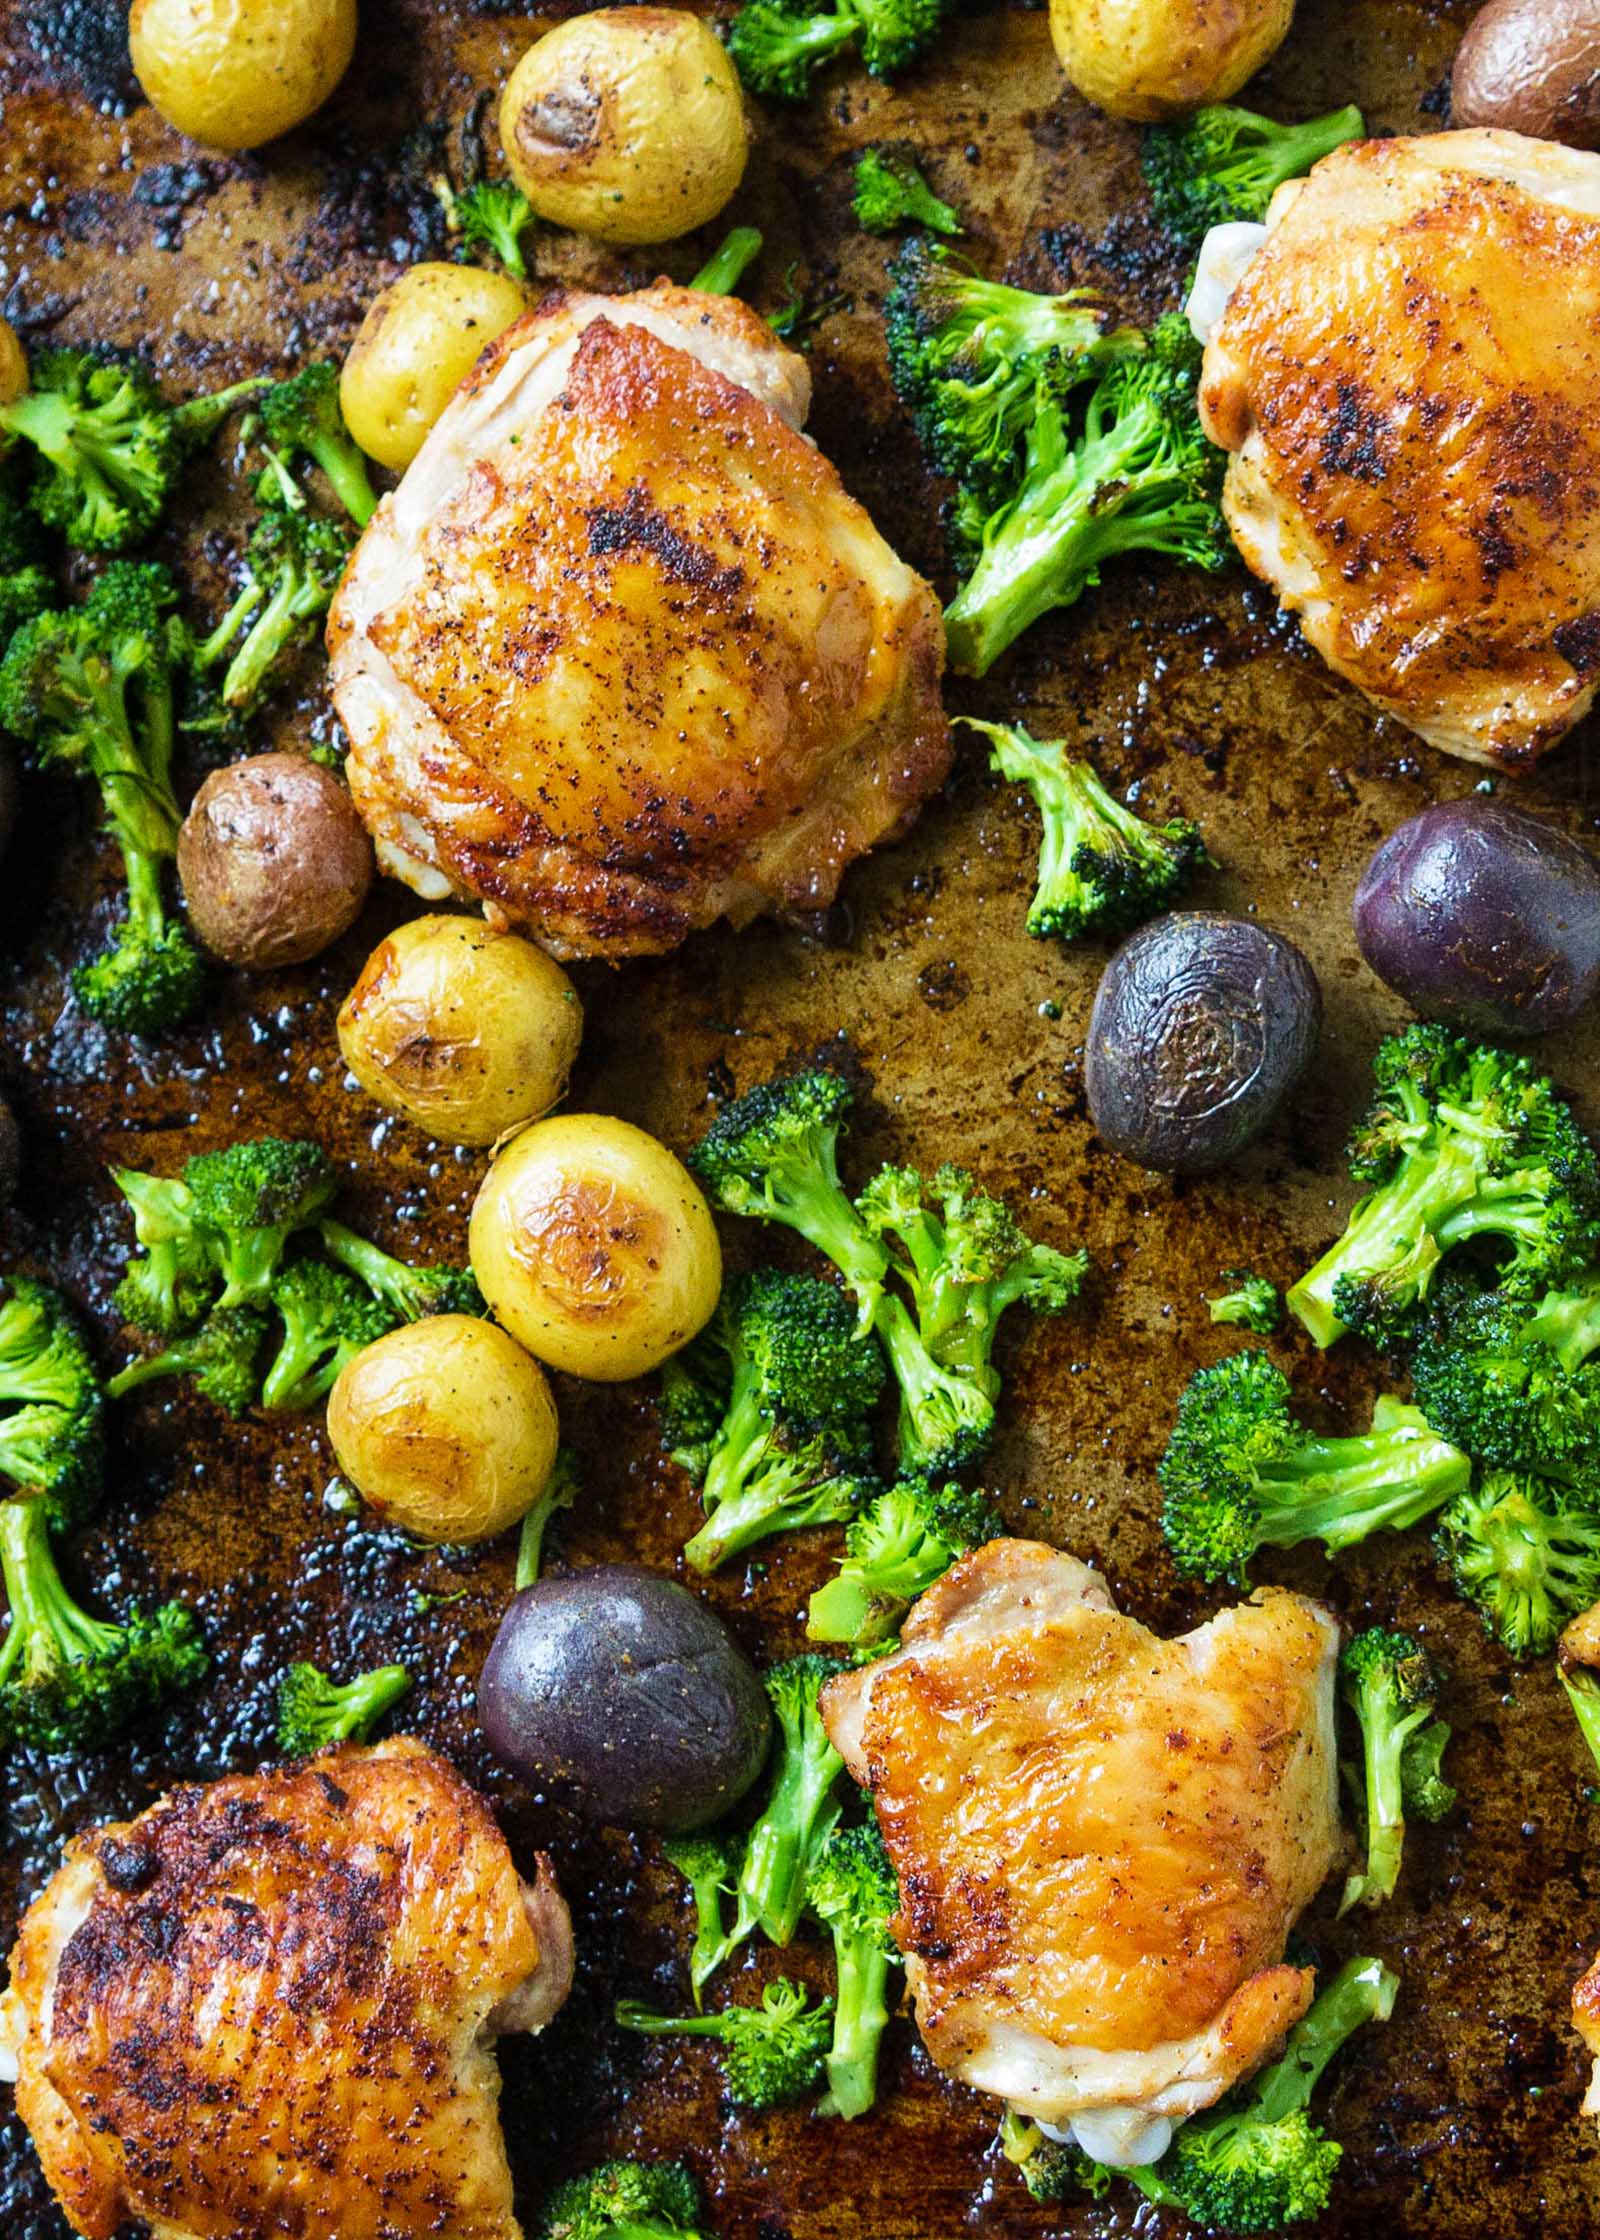 Sheet Pan Chicken with Roasted Broccoli and Potatoes from simplyrecipes.com on foodiecrush.com